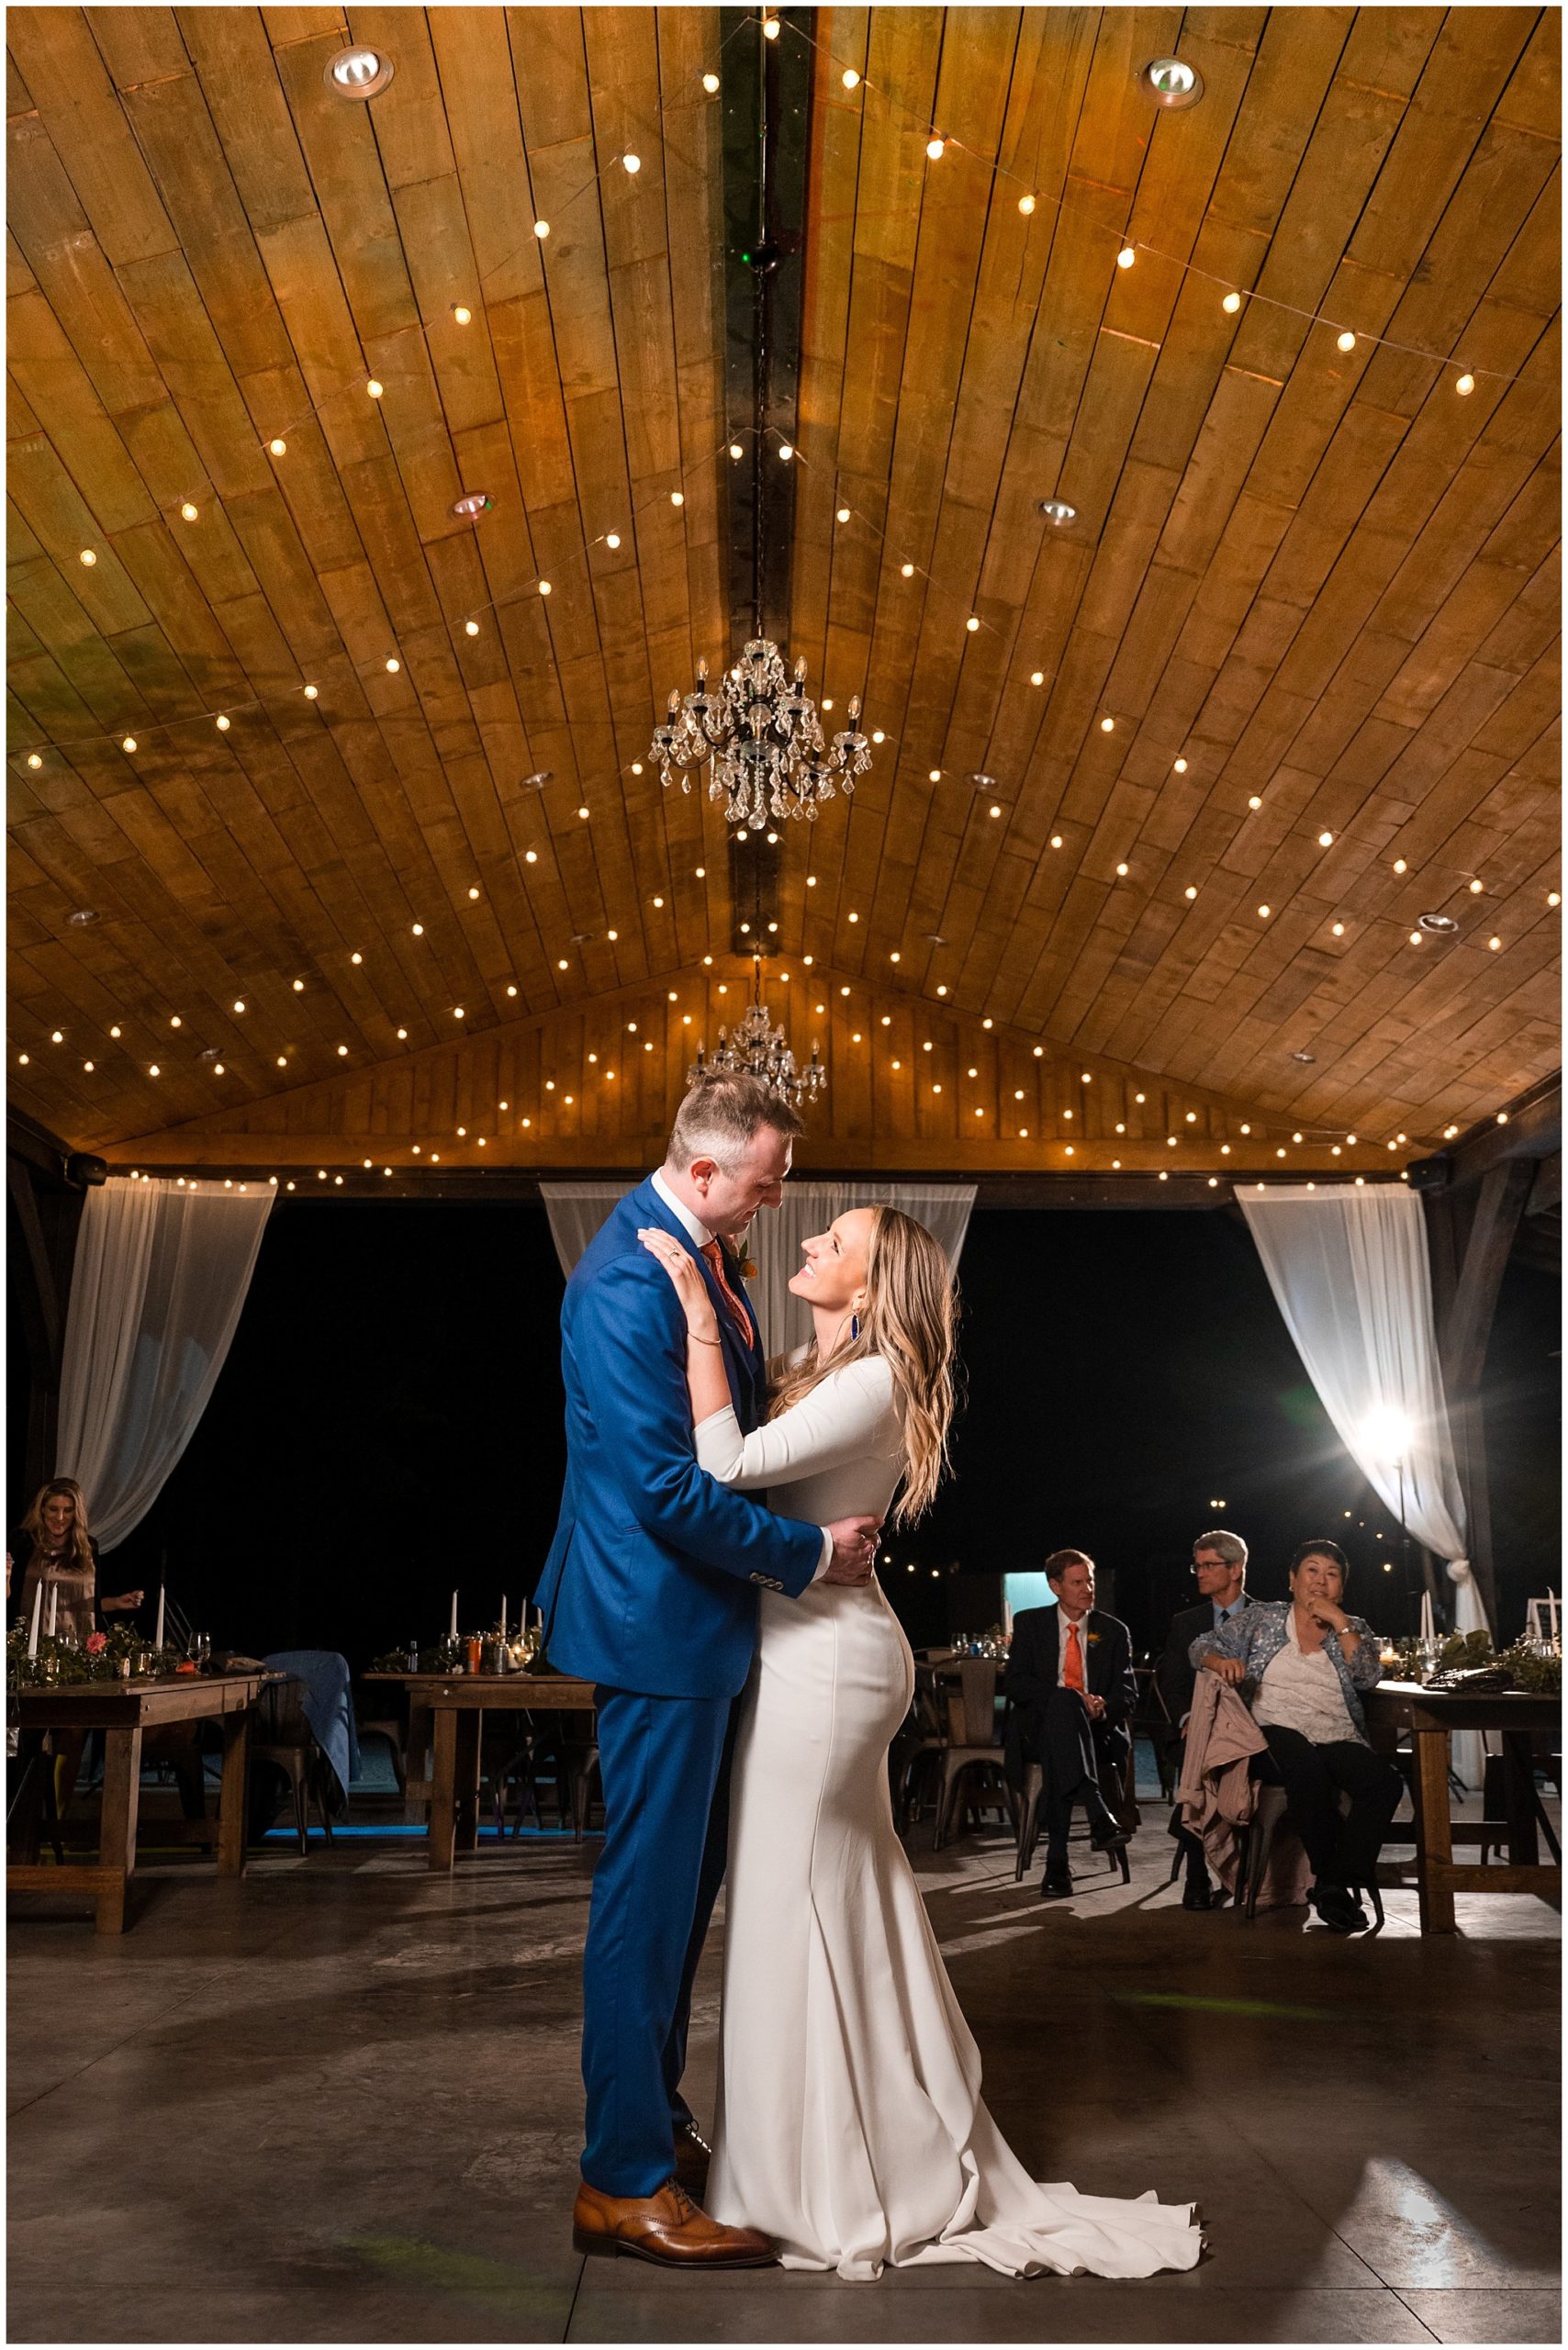 Bride and groom dancing and reception under pavilion in the forest with draping lights and chandeliers | Mountainside Weddings Kalispell Montana Destination Wedding | Jessie and Dallin Photography